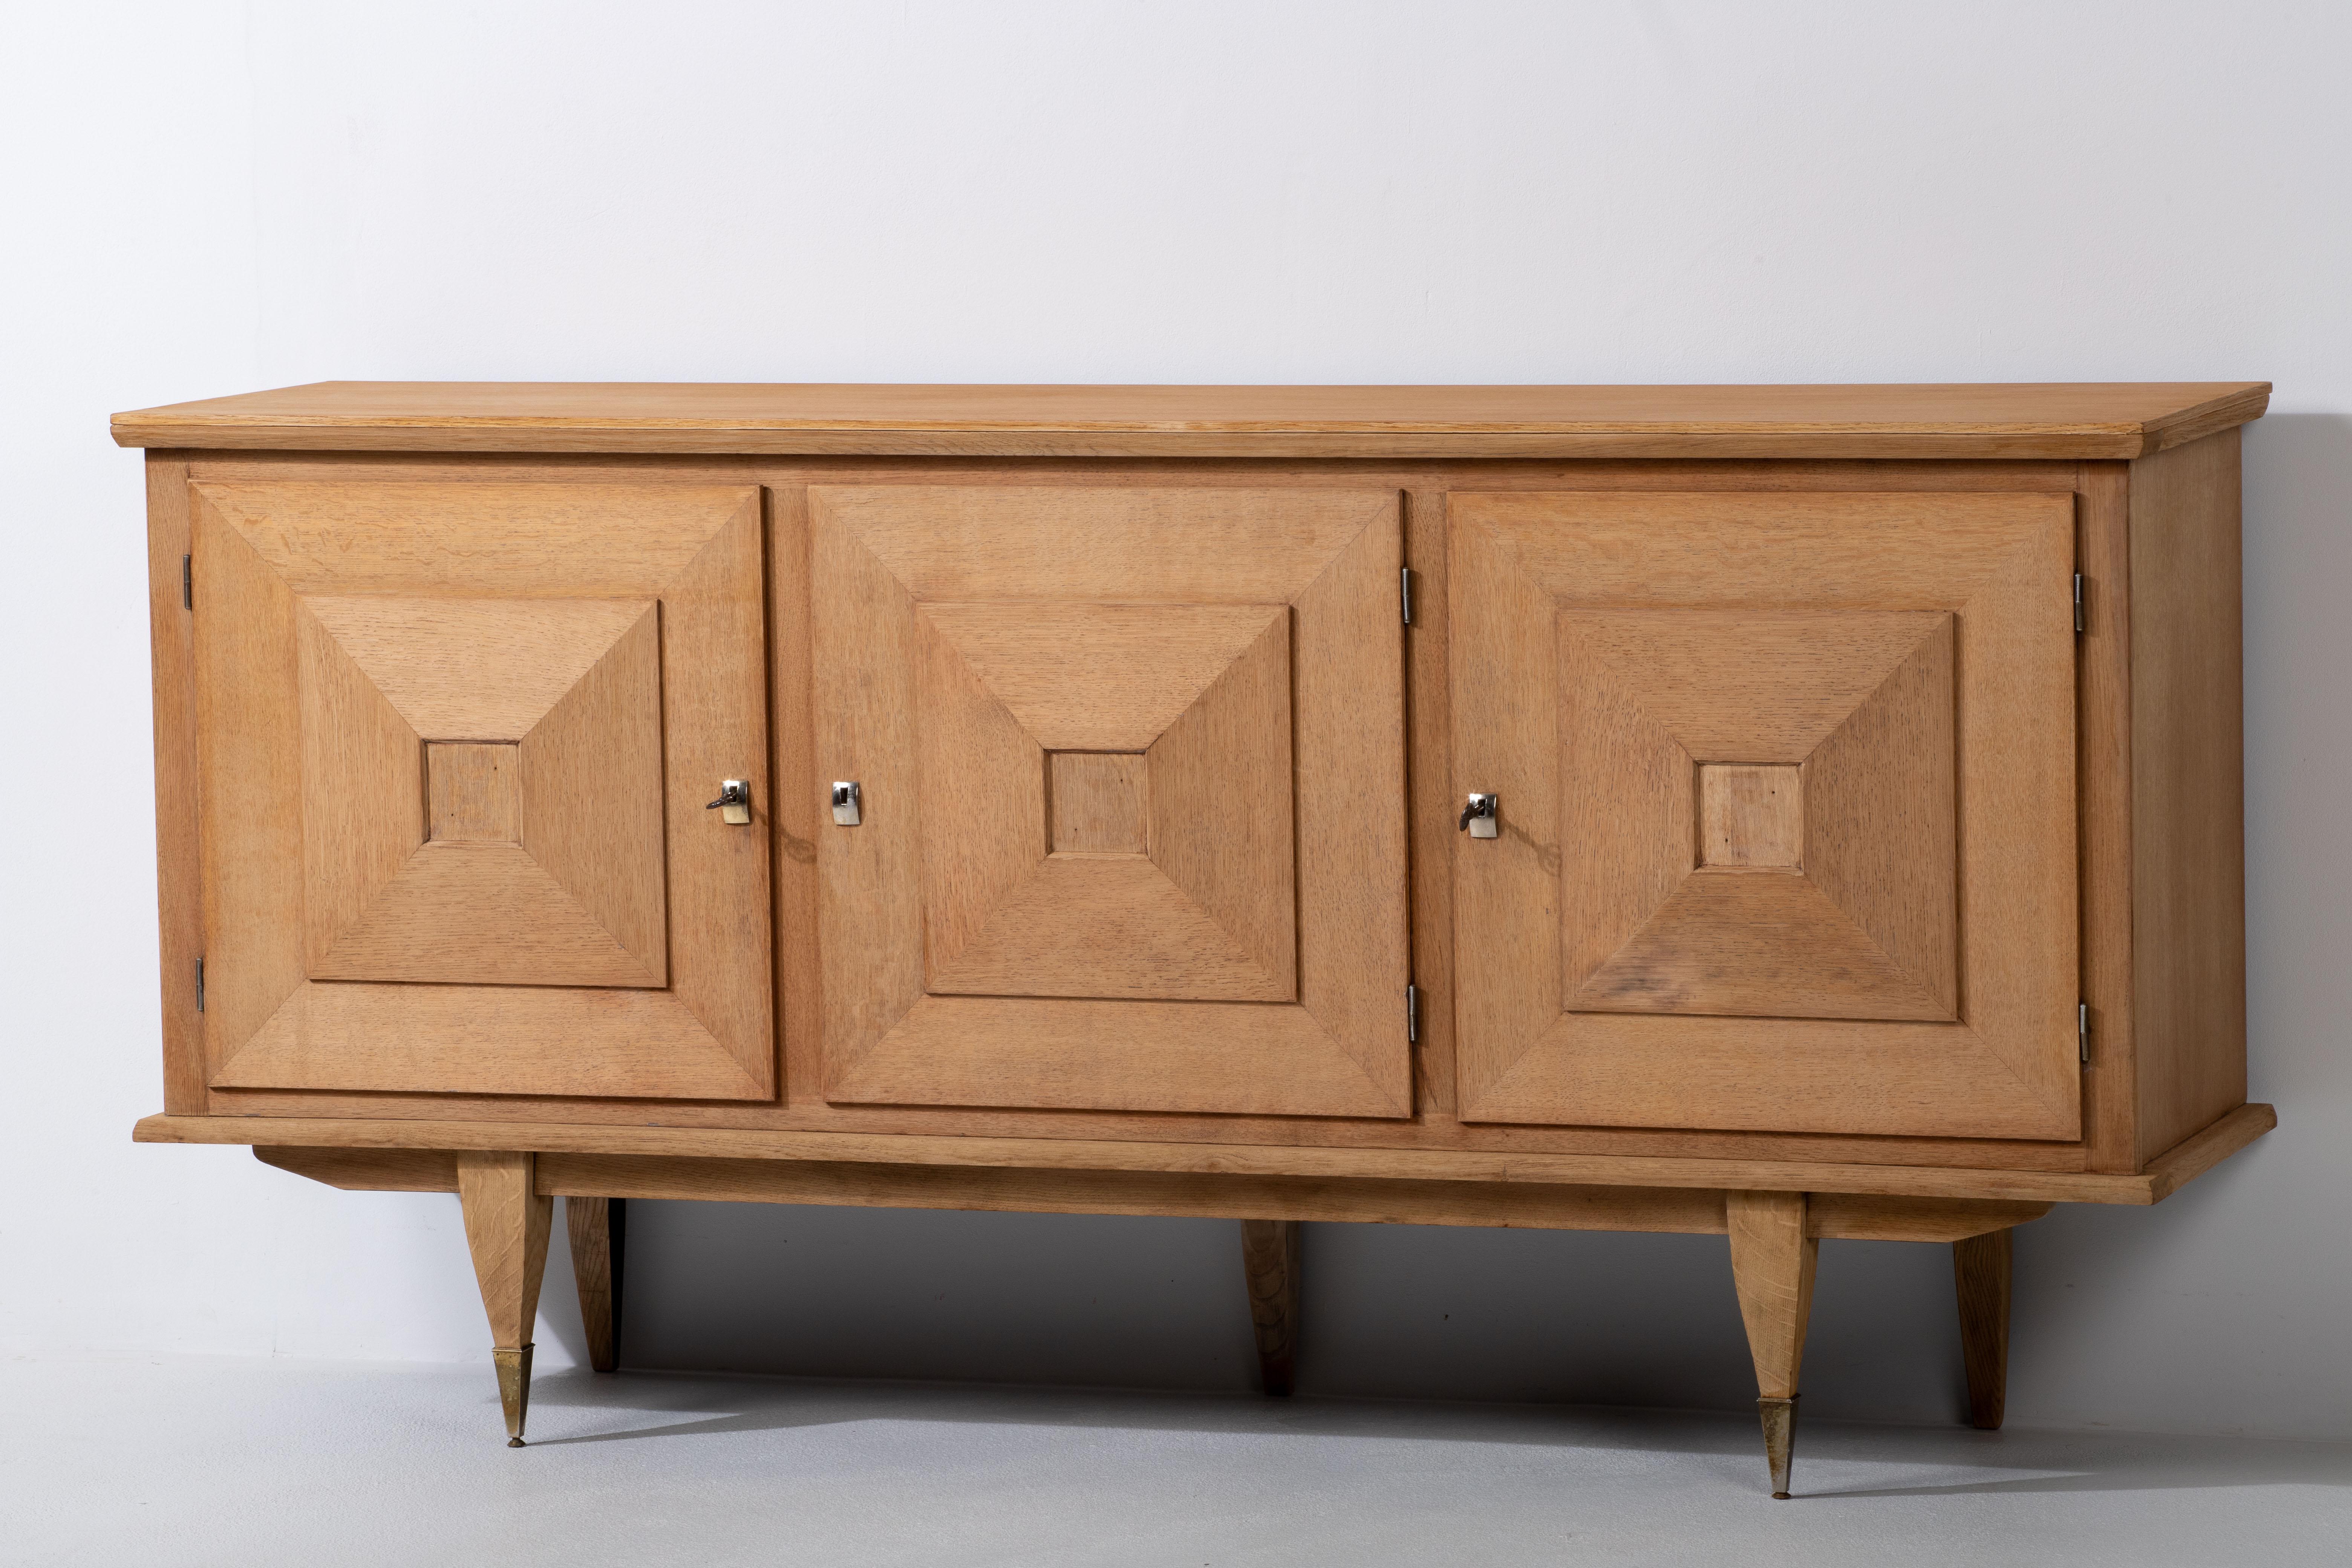 Presenting a credenza from the 1940s, meticulously crafted in France from solid oak. This Art Deco Brutalist sideboard exudes a captivating charm that seamlessly blends form and function. Comprising four spacious storage compartments, the credenza